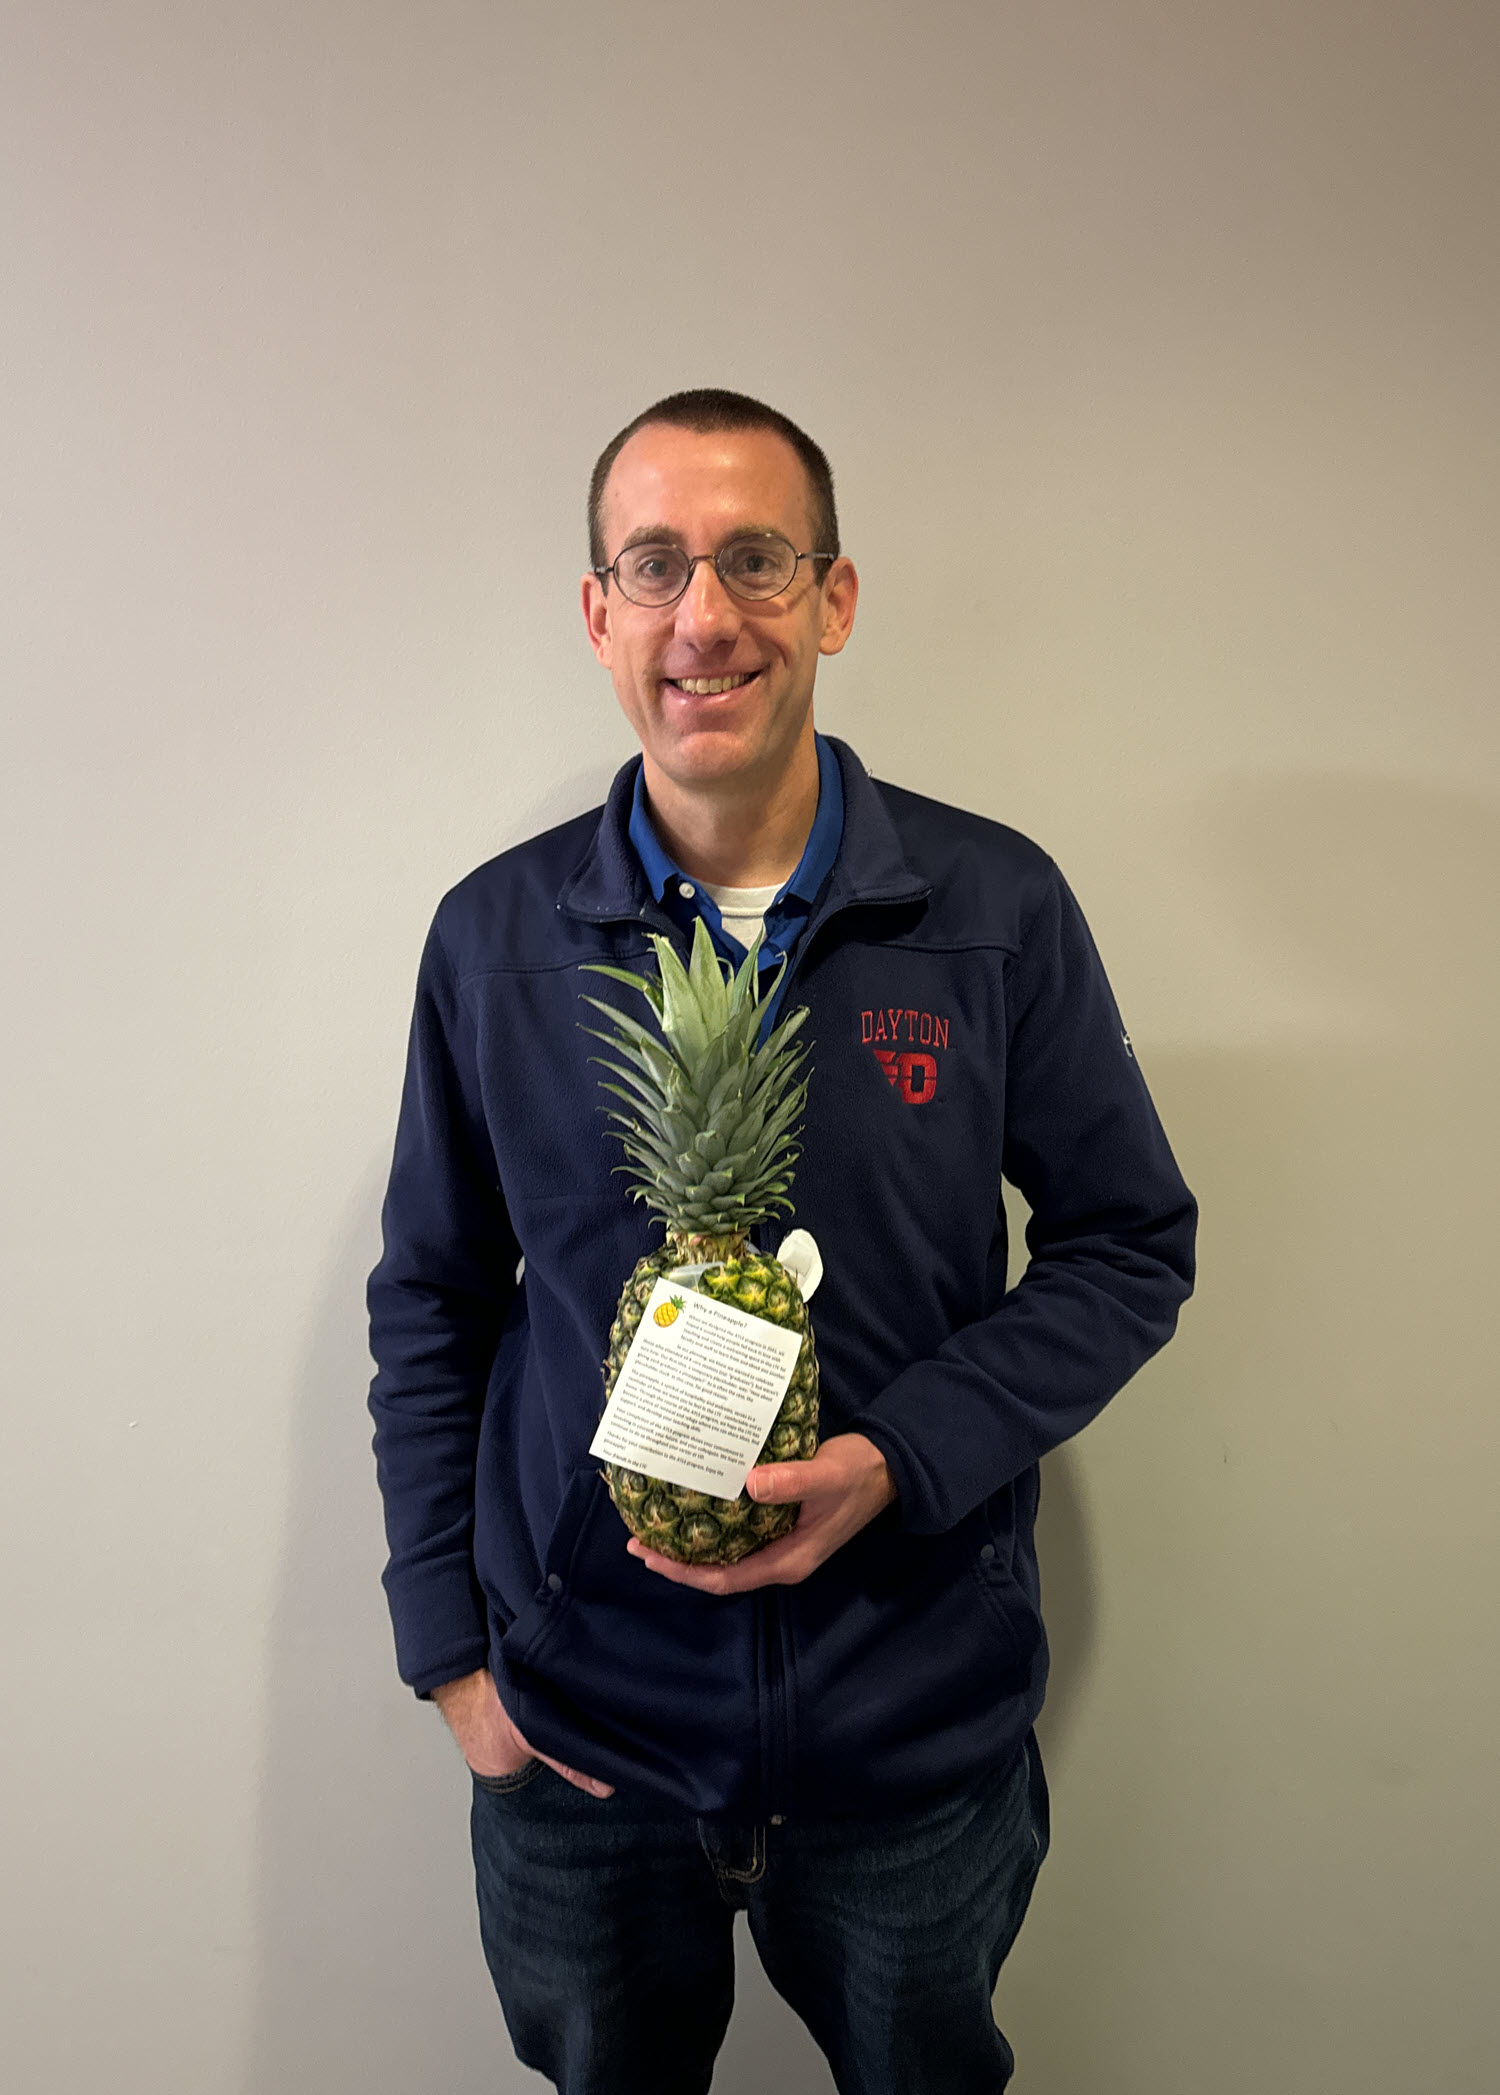 Faculty member Brian Rigling pose with a pineapple to signify graduation from ATLS.